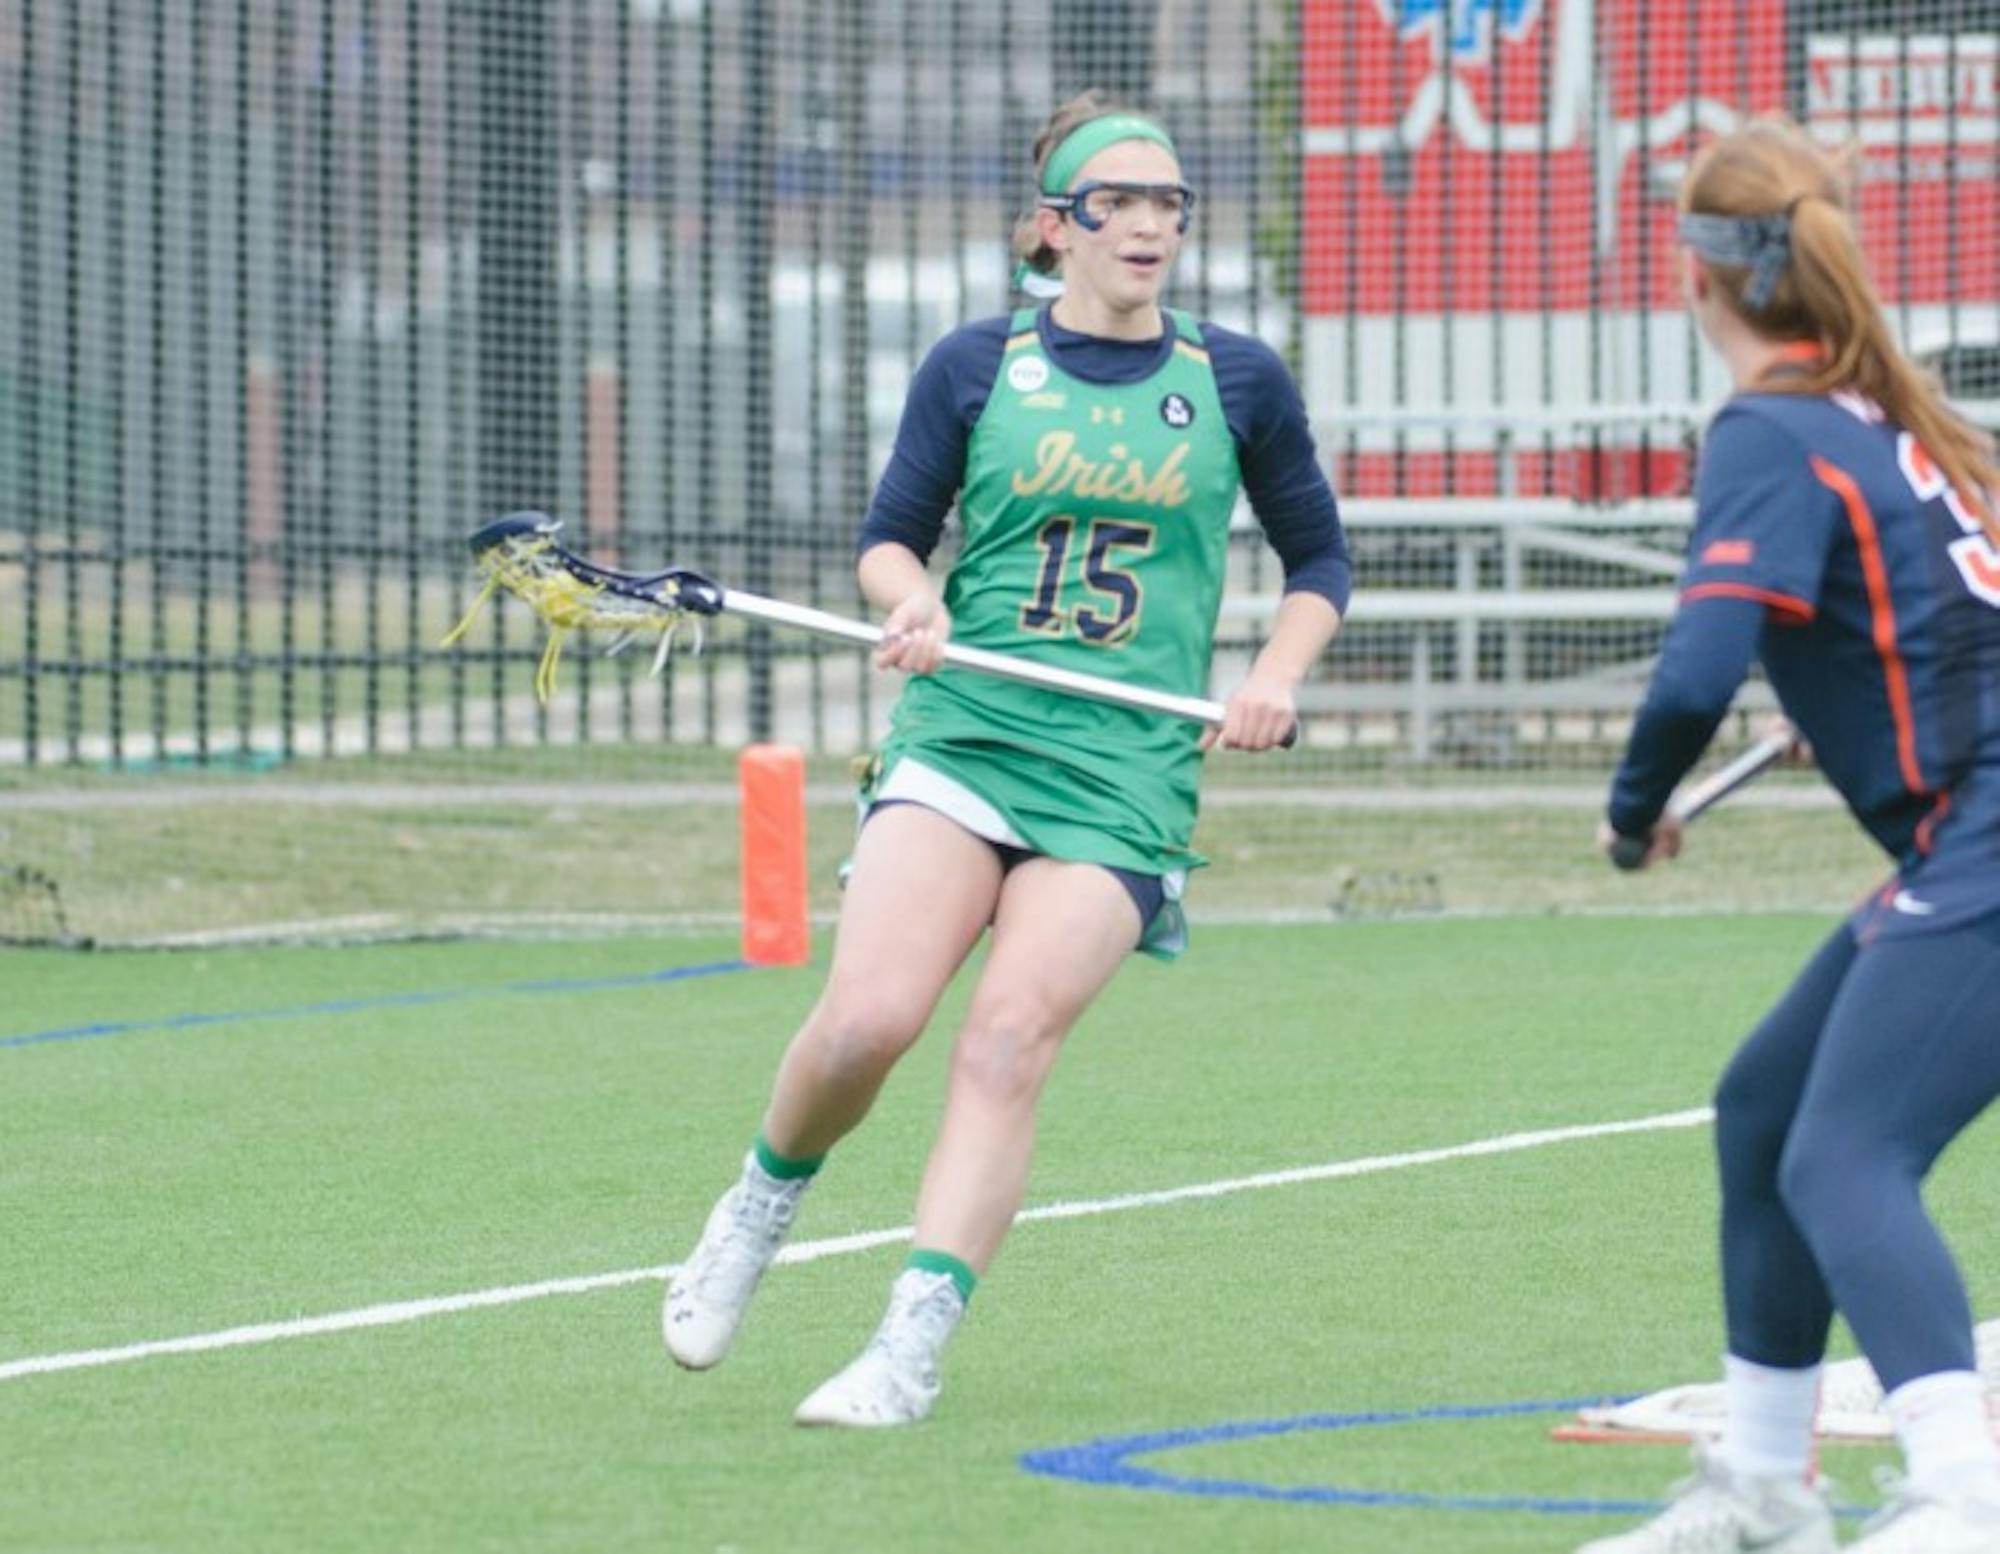 Senior attack Cortney Fortunato surveys the field during Notre Dame's 16-4 victory over Virginia on March 19, 2016 at Arlotta Stadium.